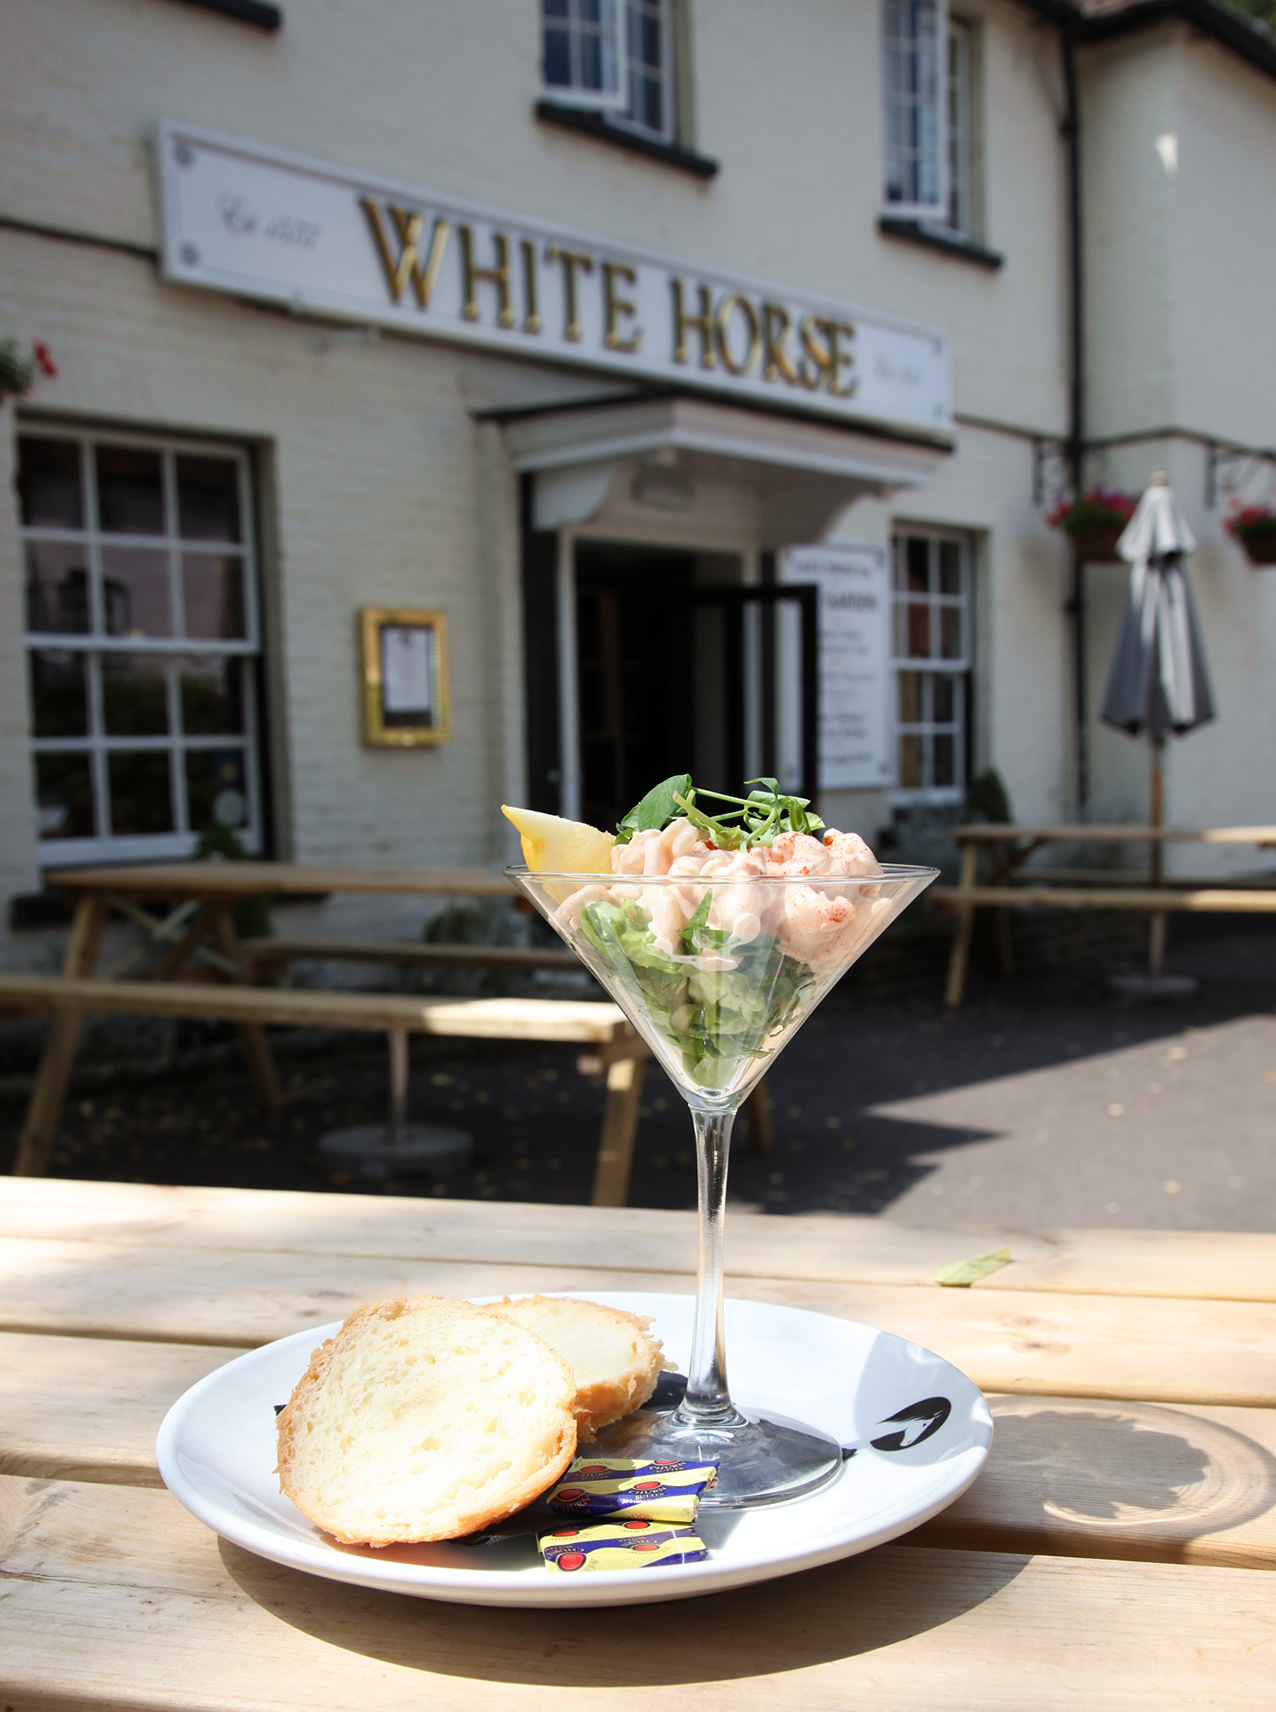 Lunch at the White Horse. Prawn cocktail served in a glass on a tablein the sunshine in front of the 16th century pub